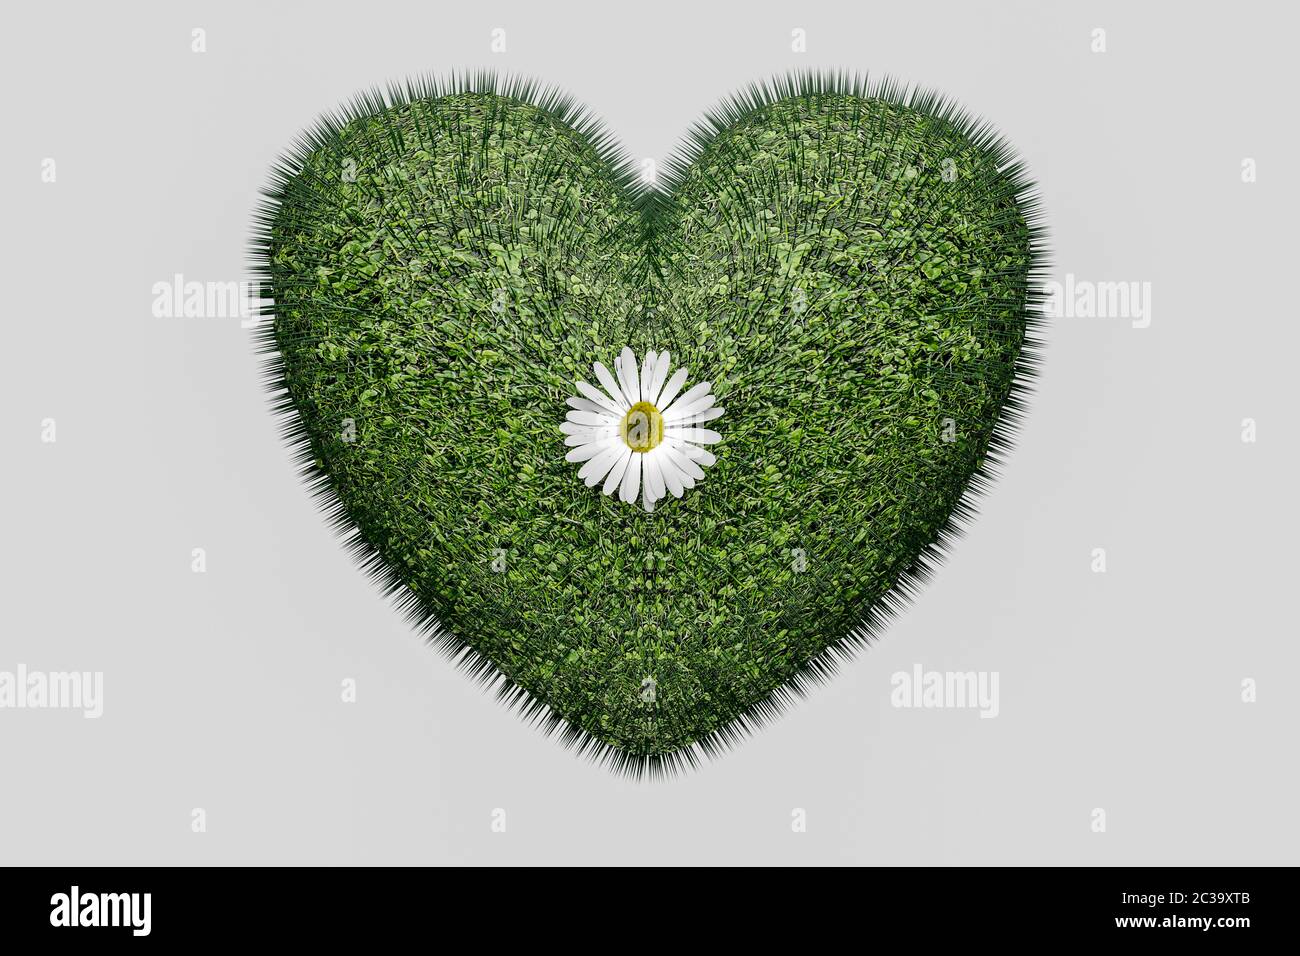 Download Green Grass In A Heart Shape With Daisy Flower Romantic Or Love Nature Concept 3d Illustration Stock Photo Alamy